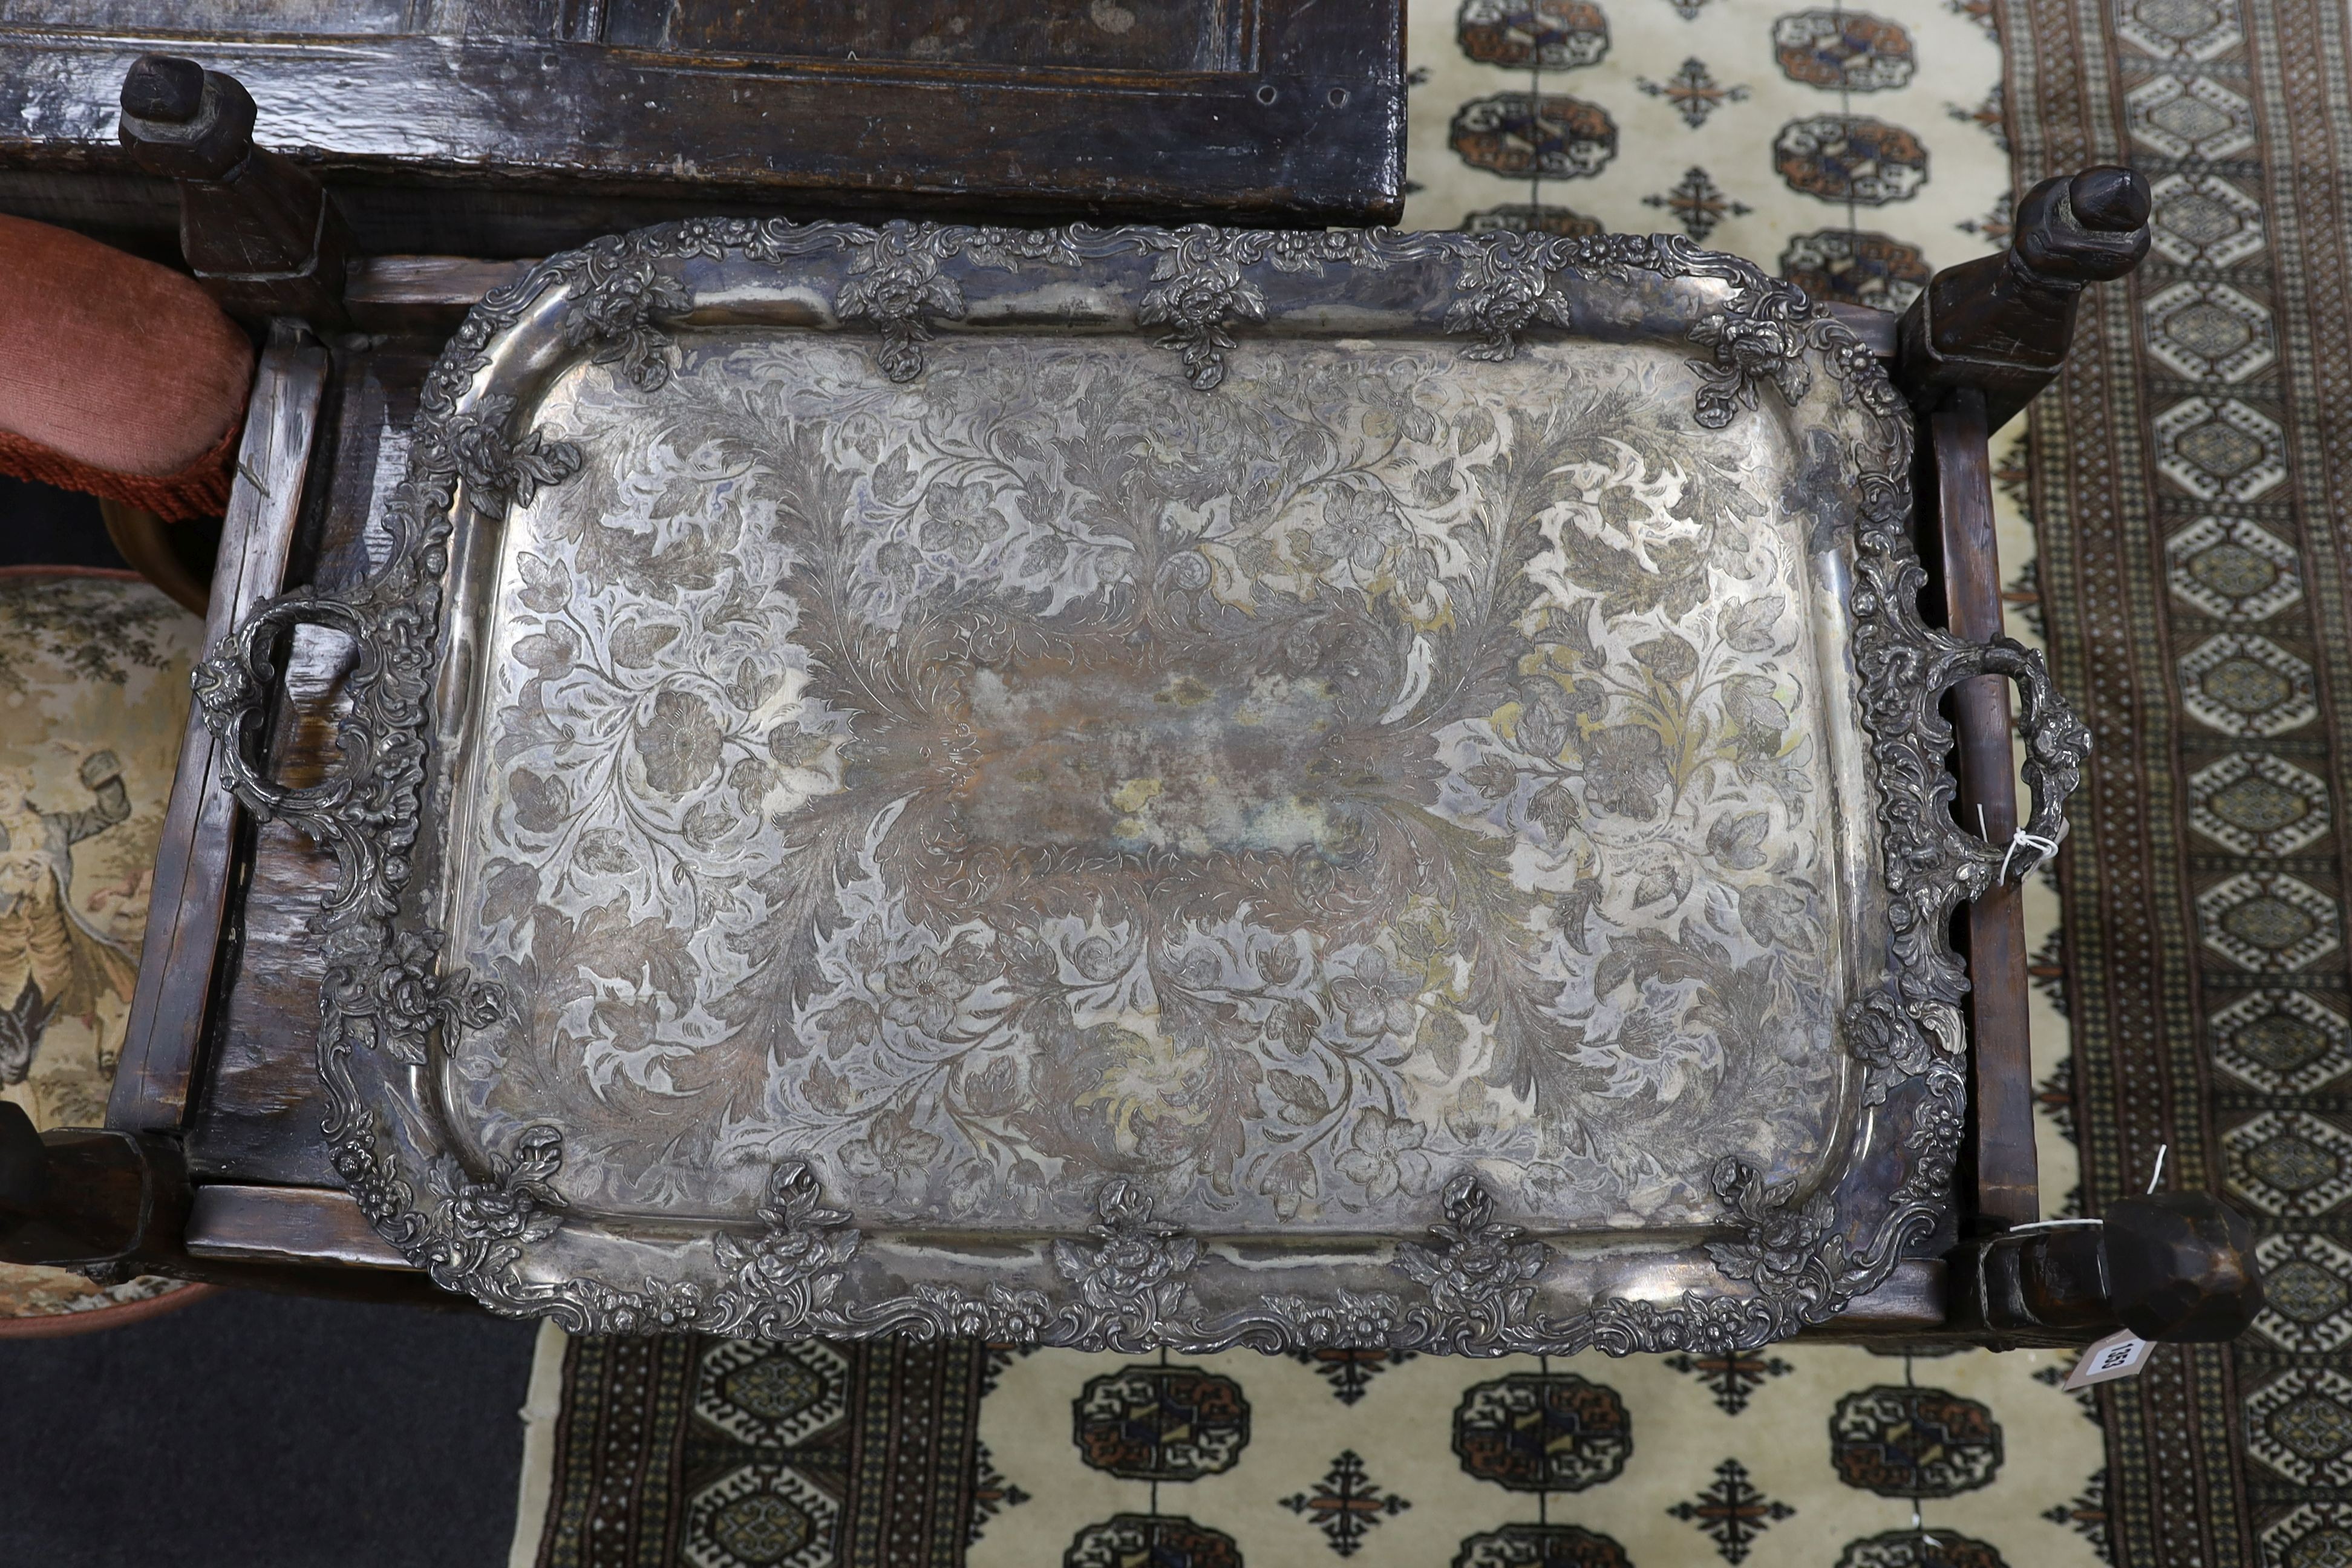 A large two handled silver plated tray with ornate floral edge, 87 cms wide.